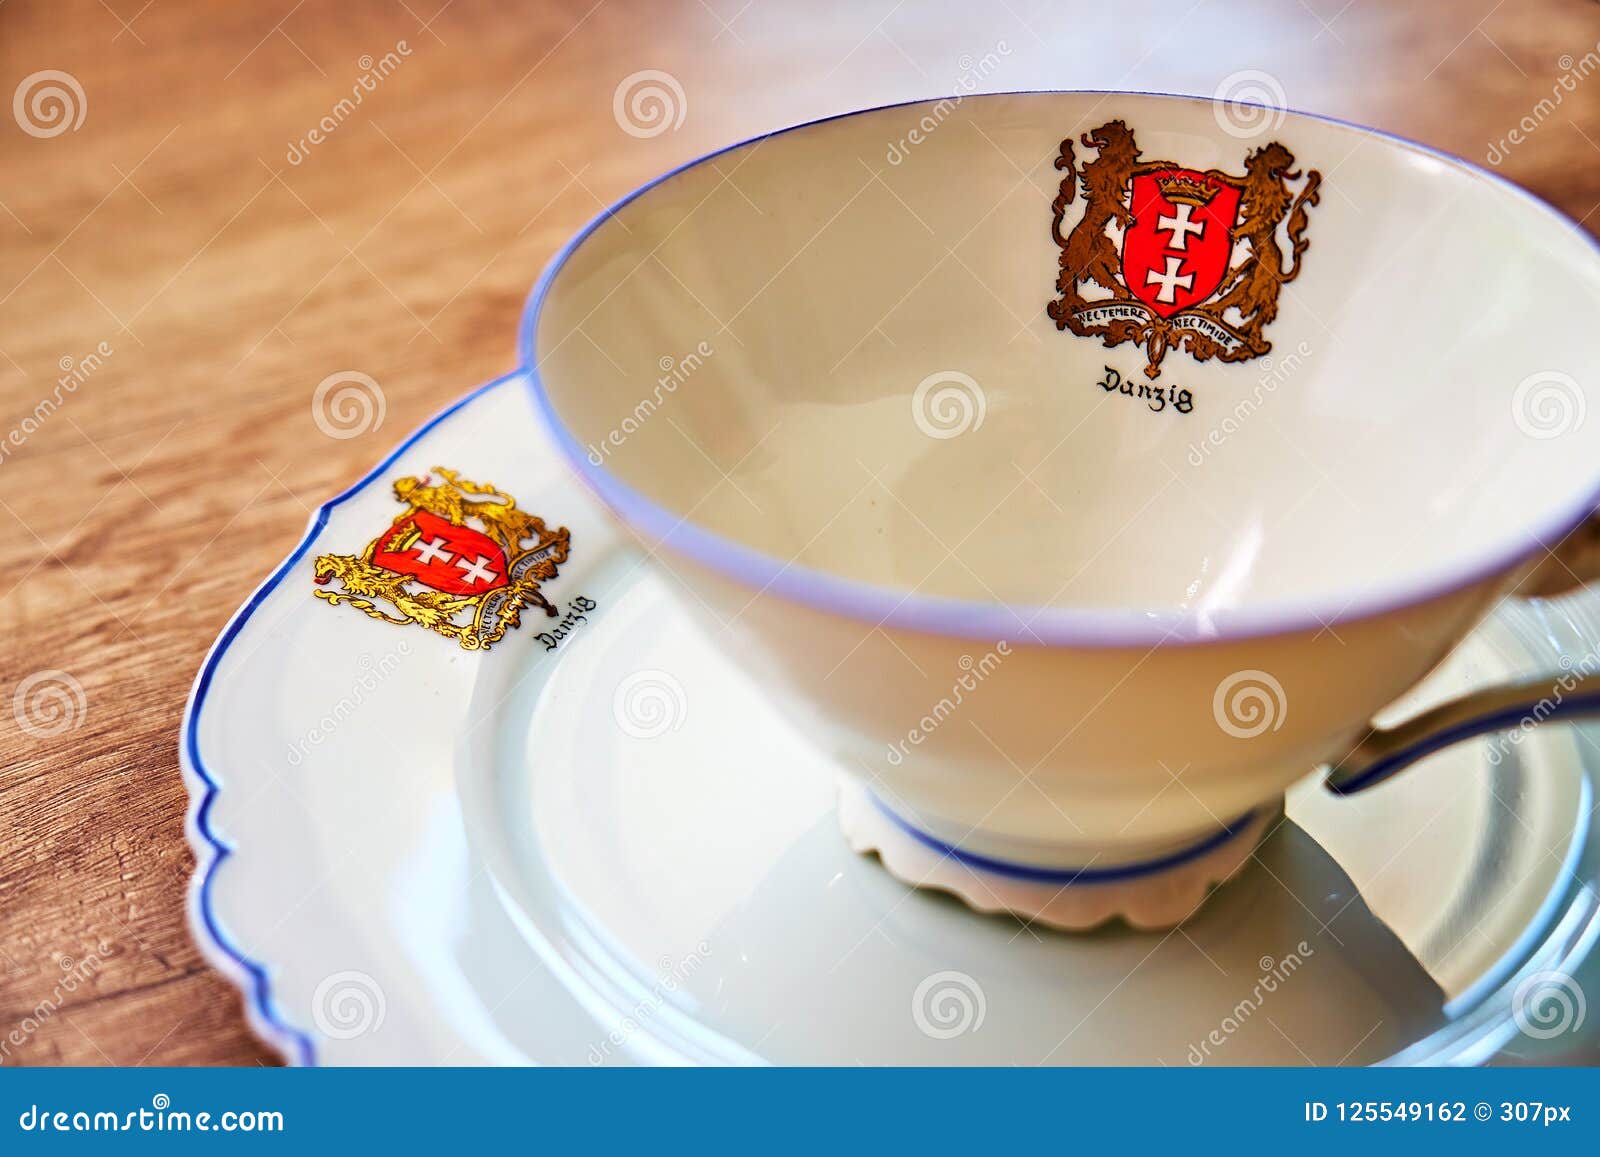 very old vintage cup with a plate on a wooden table, both with `danzig` written on it underneath the city`s coat of arms